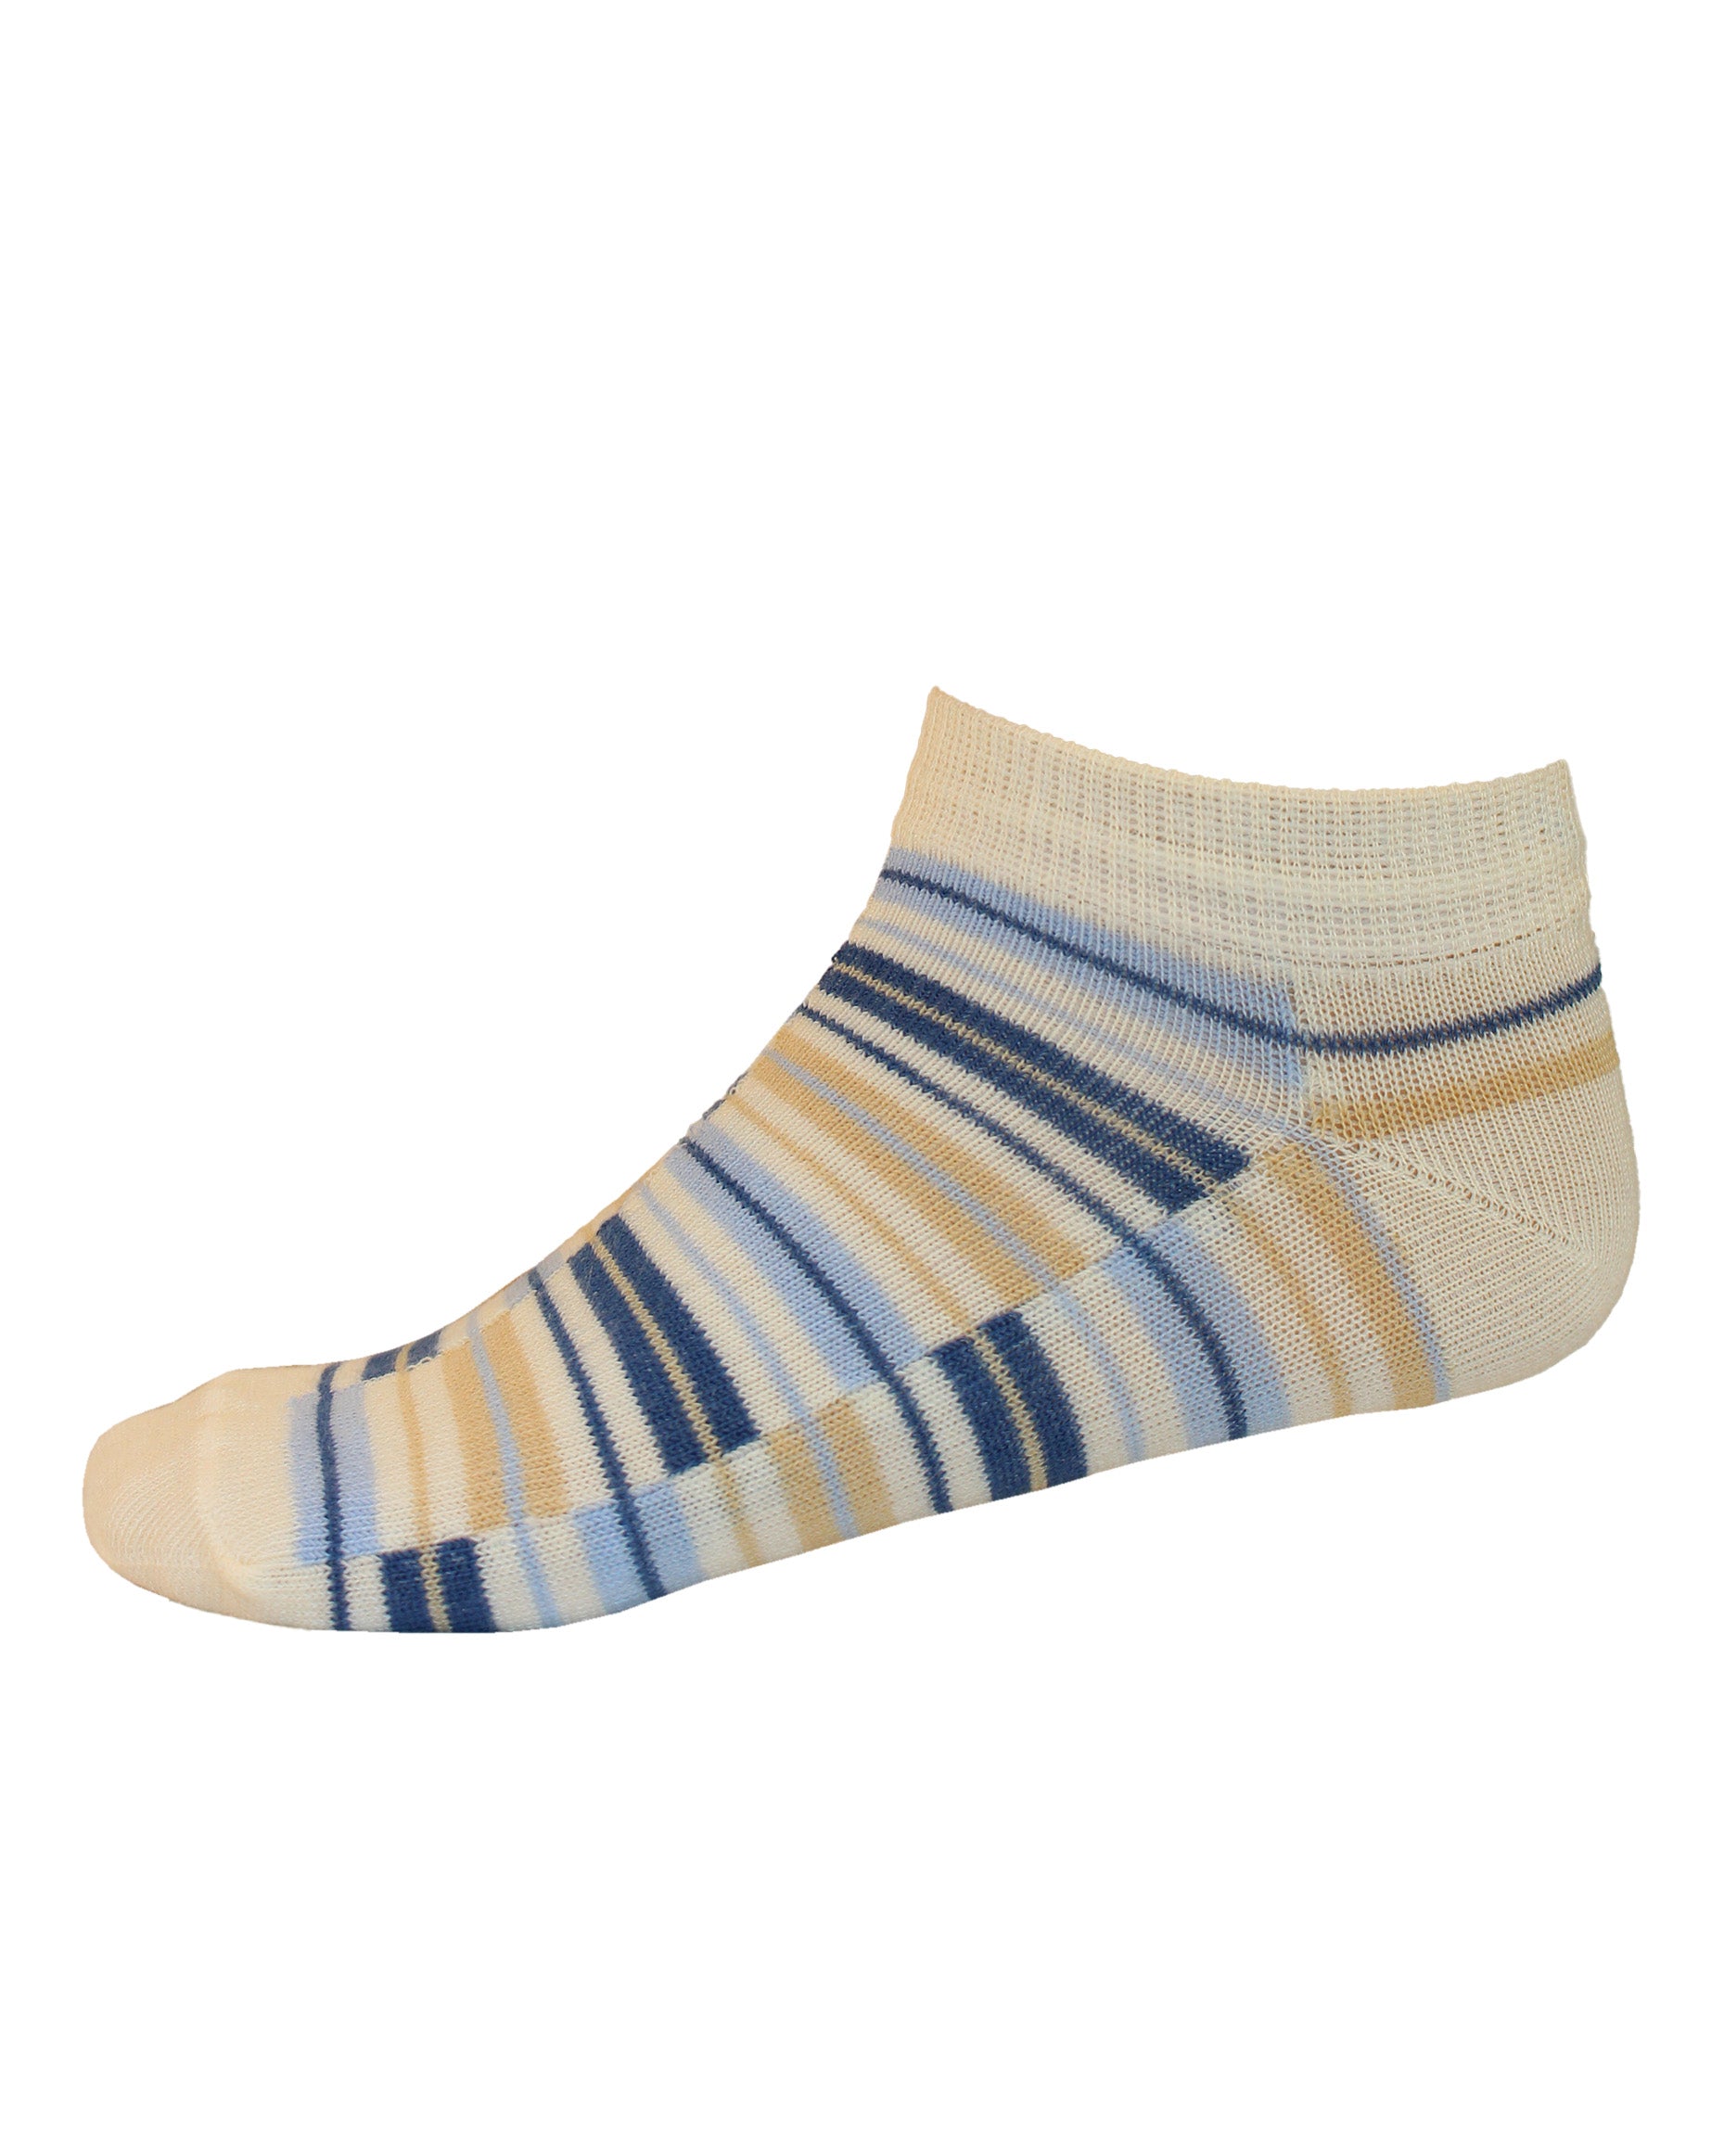 Omsa Serenella Harry Calzino - Children's low ankle cotton sneaker ankle socks with a linear stripe pattern in cream, light blue, navy and beige.